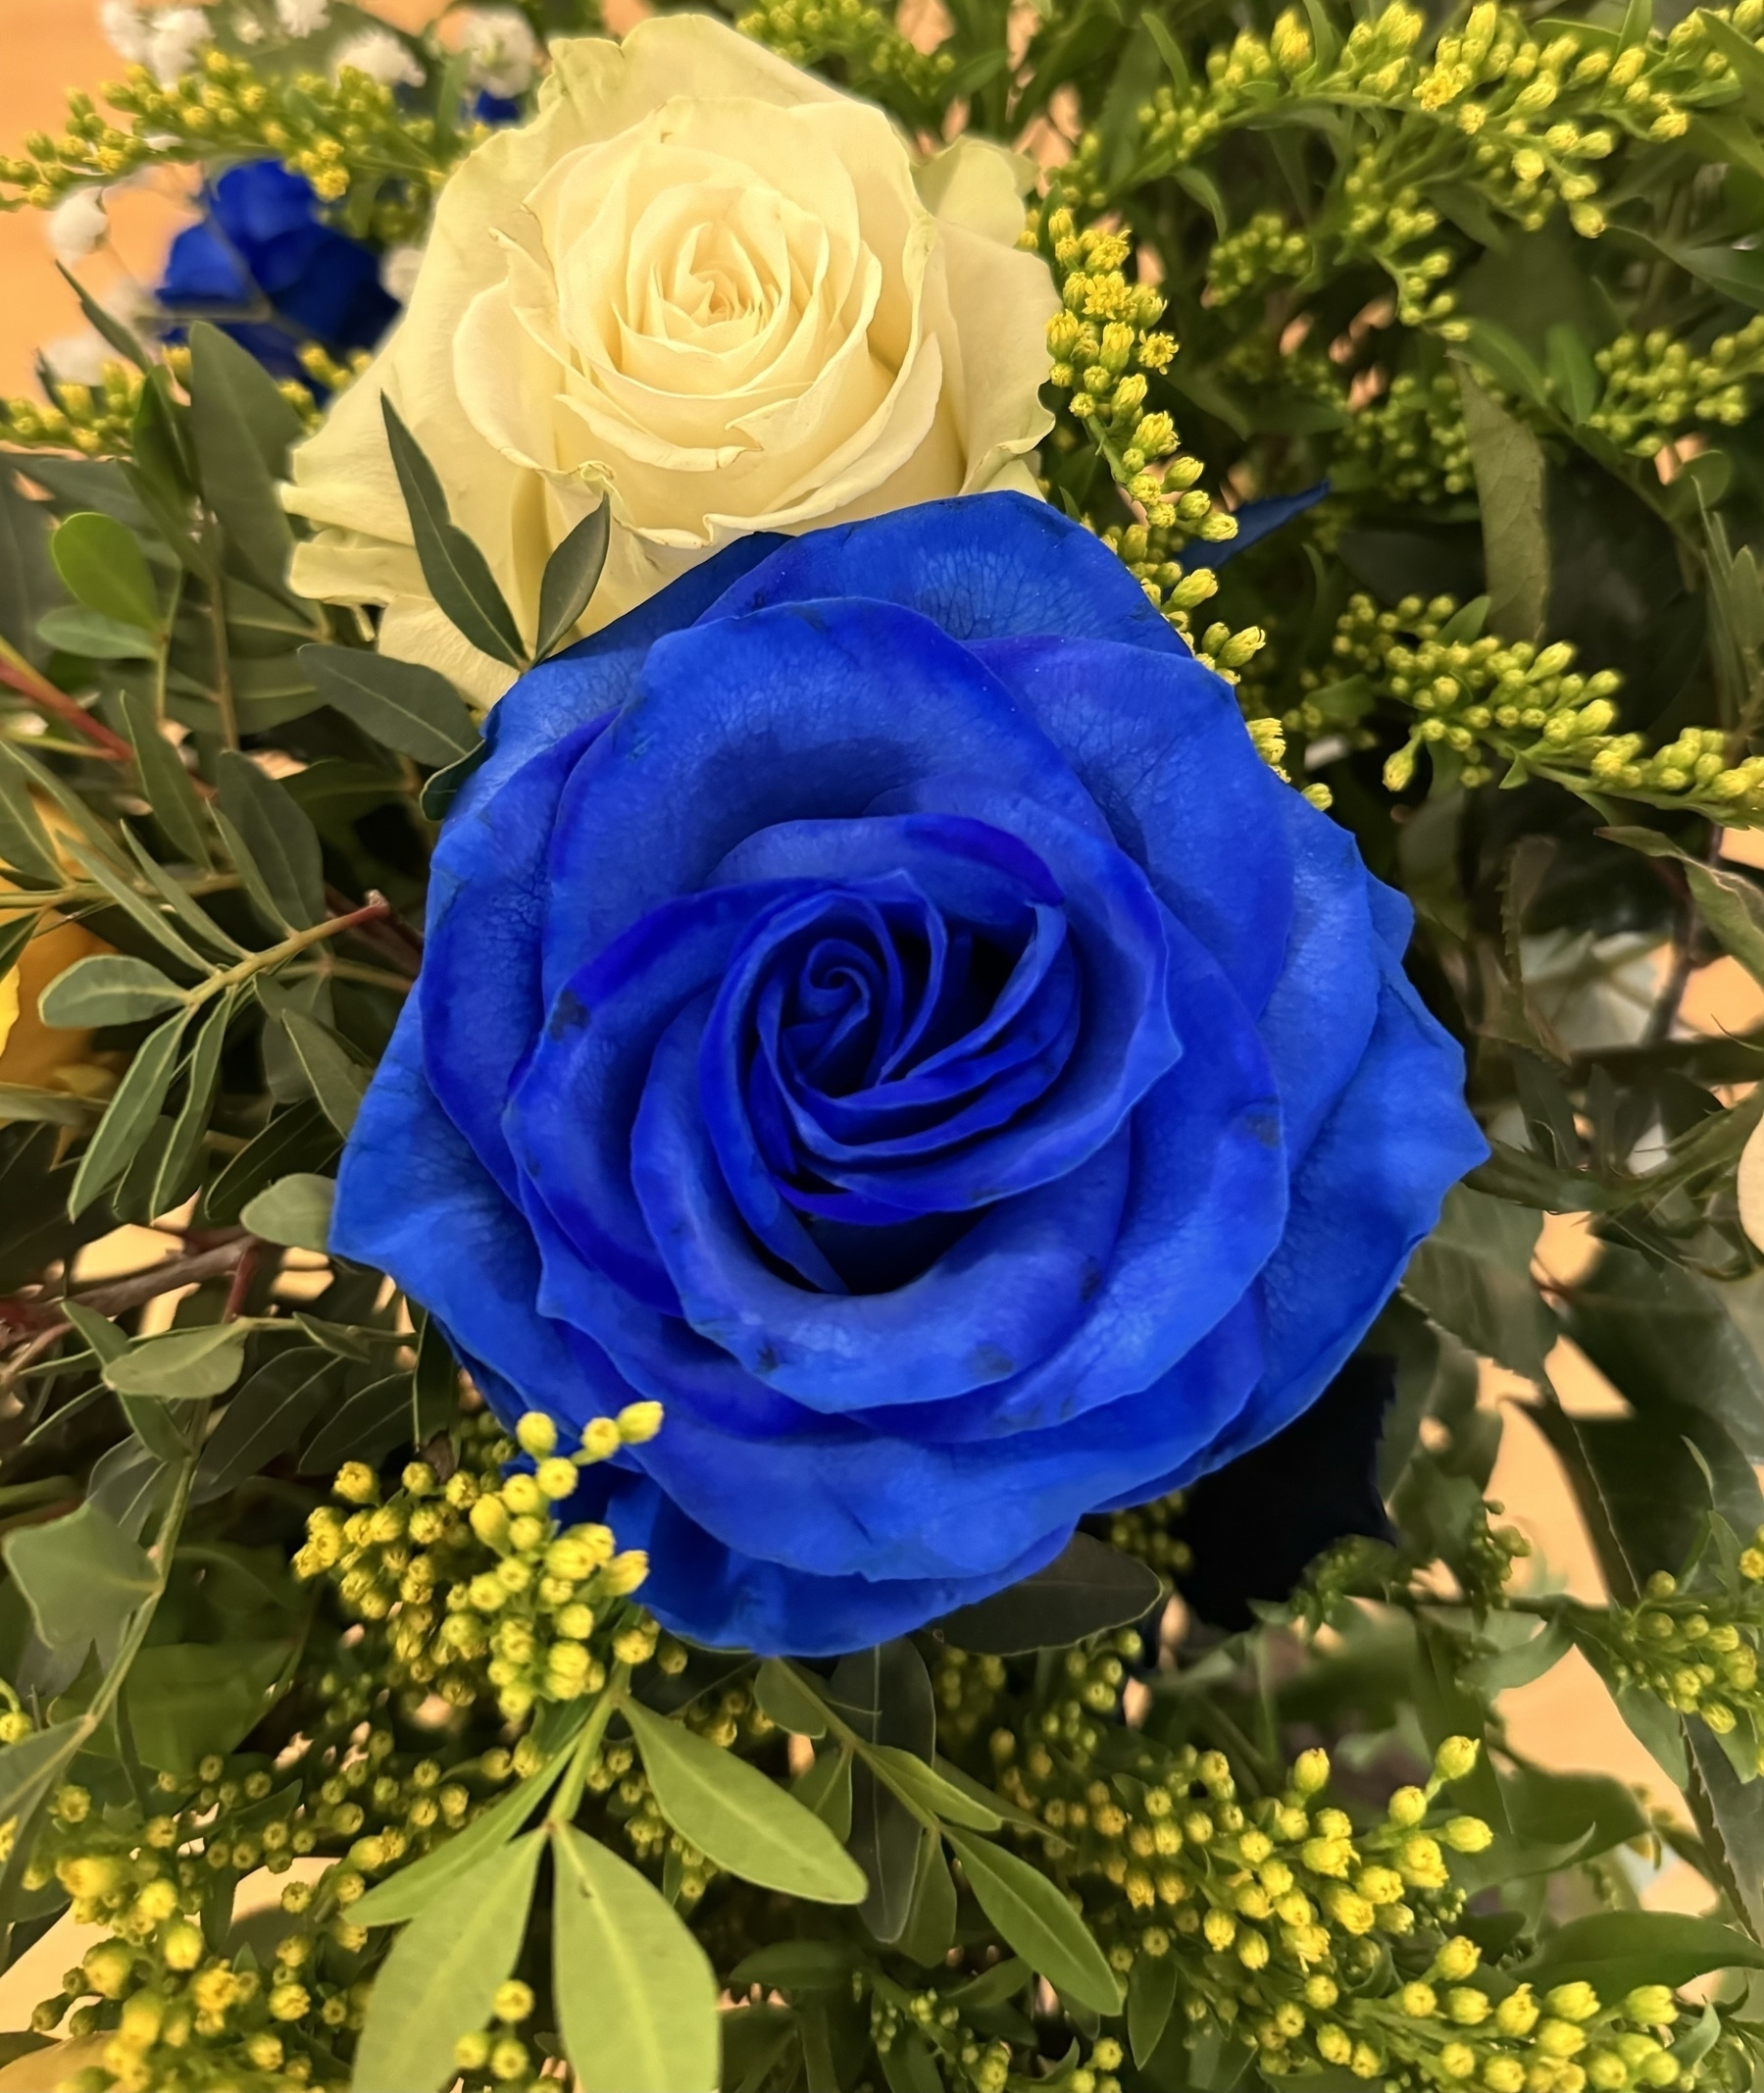 A blue rose in a bouquet of flowers.